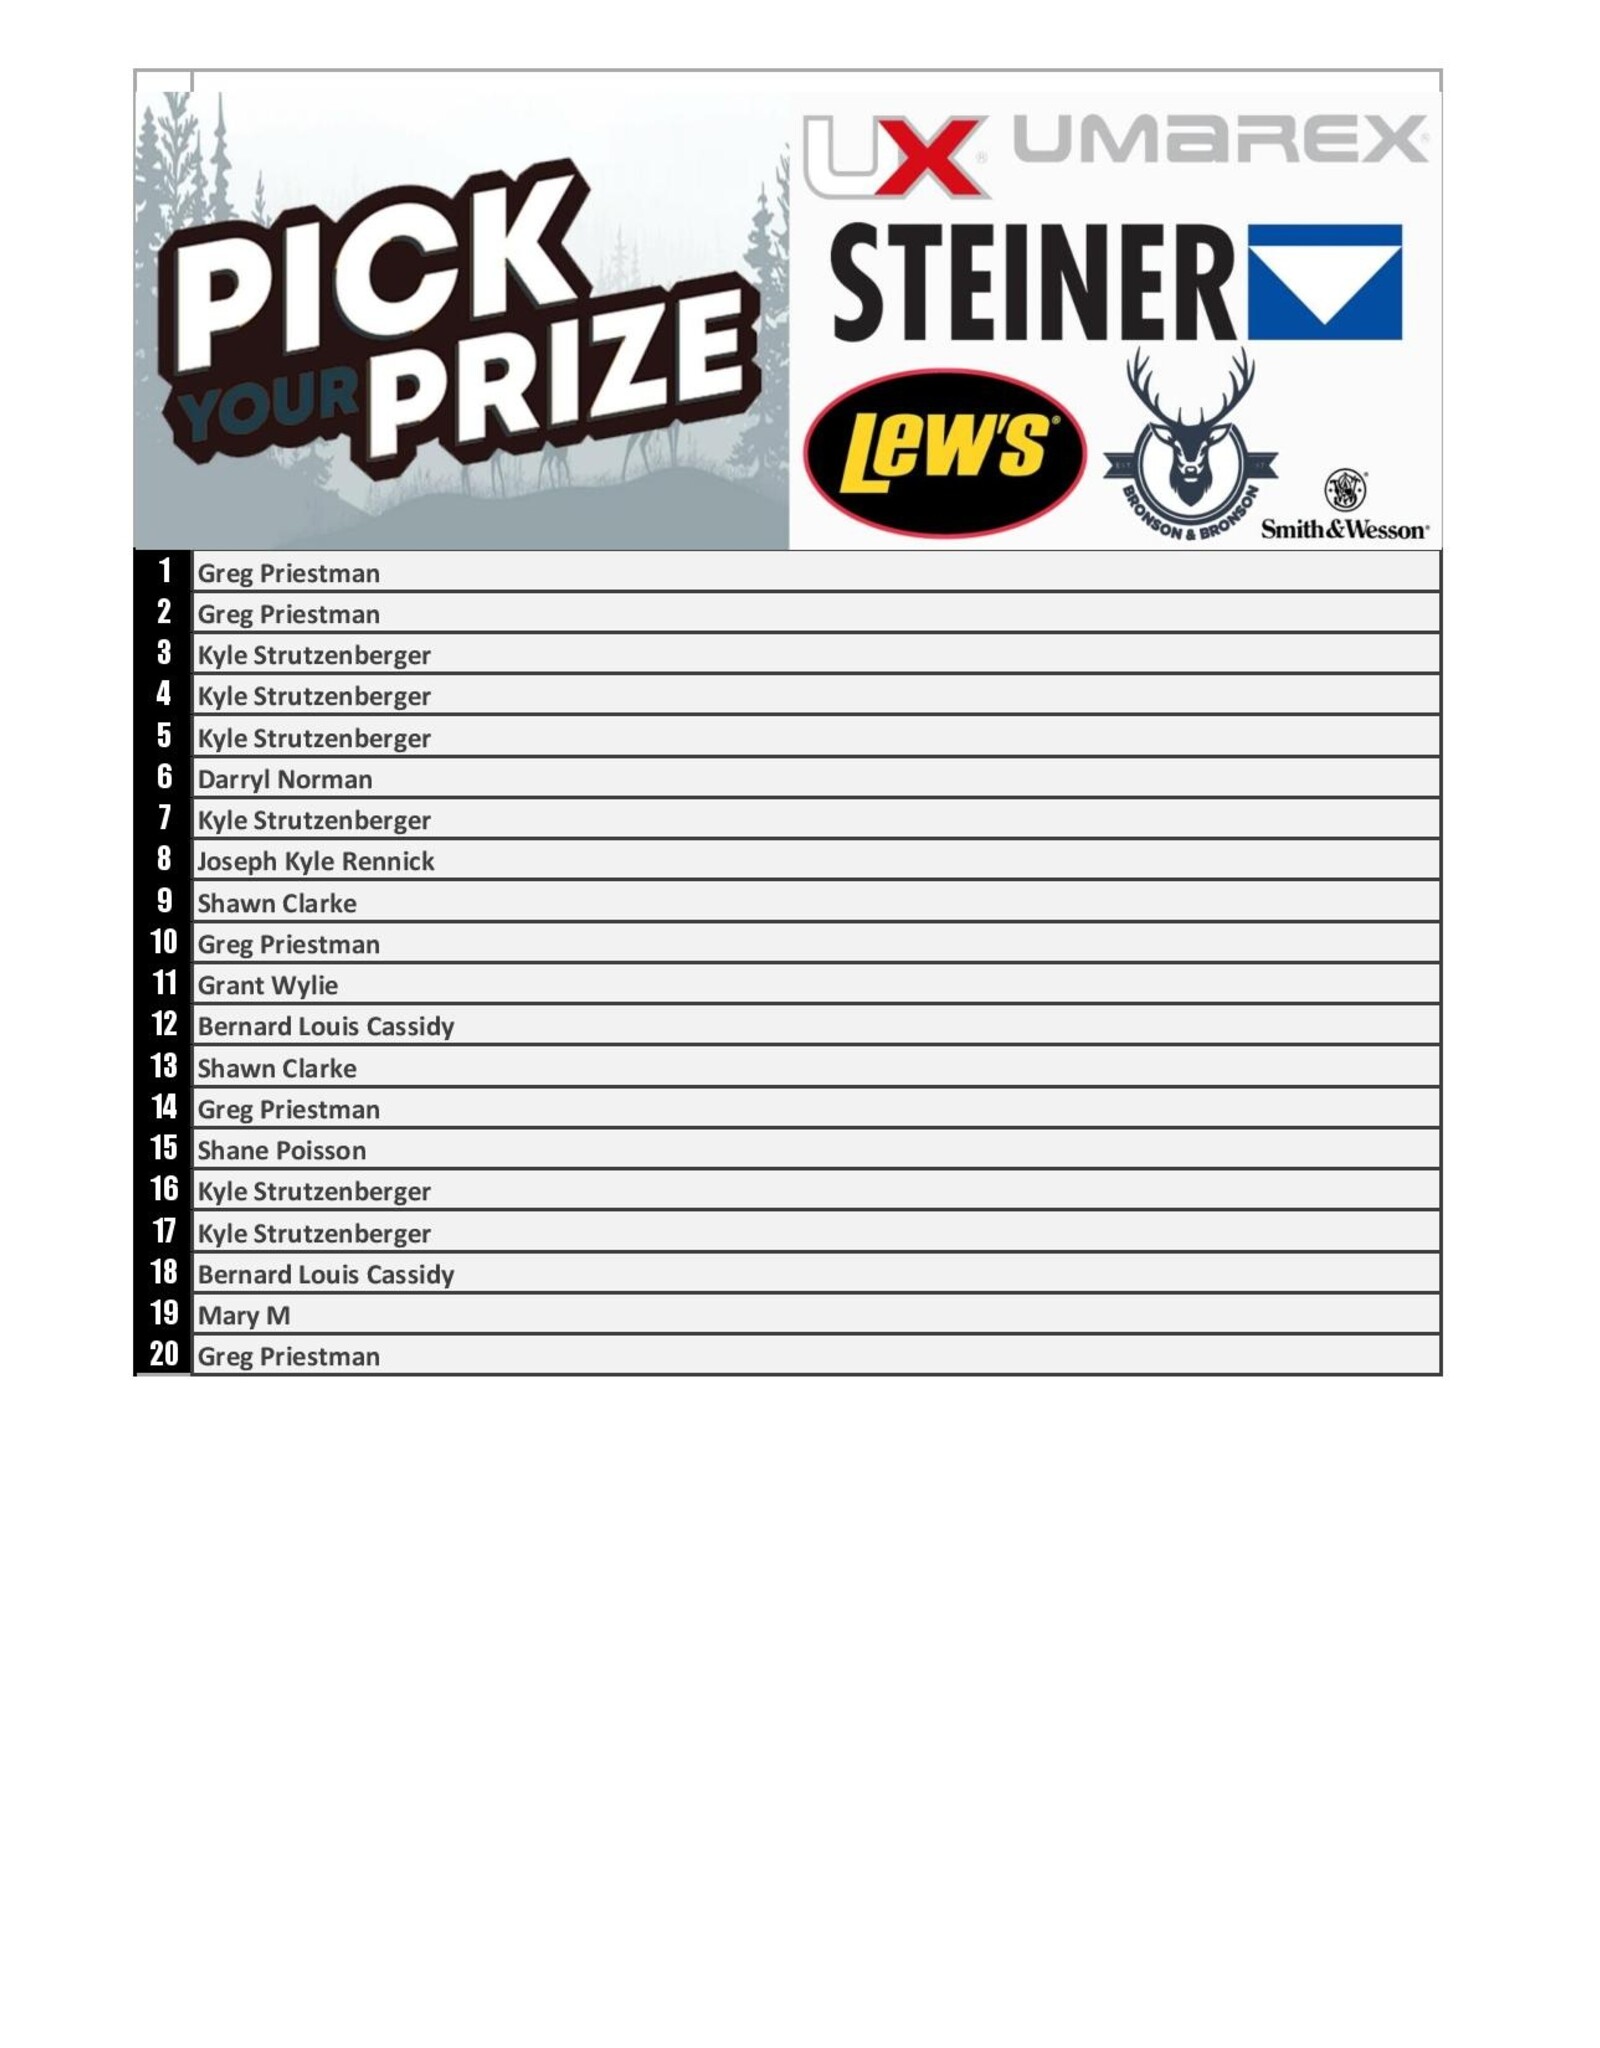 DRAW #1374 - Pick Your Prize - Umarex, Steiner, Lews OR Gift Card